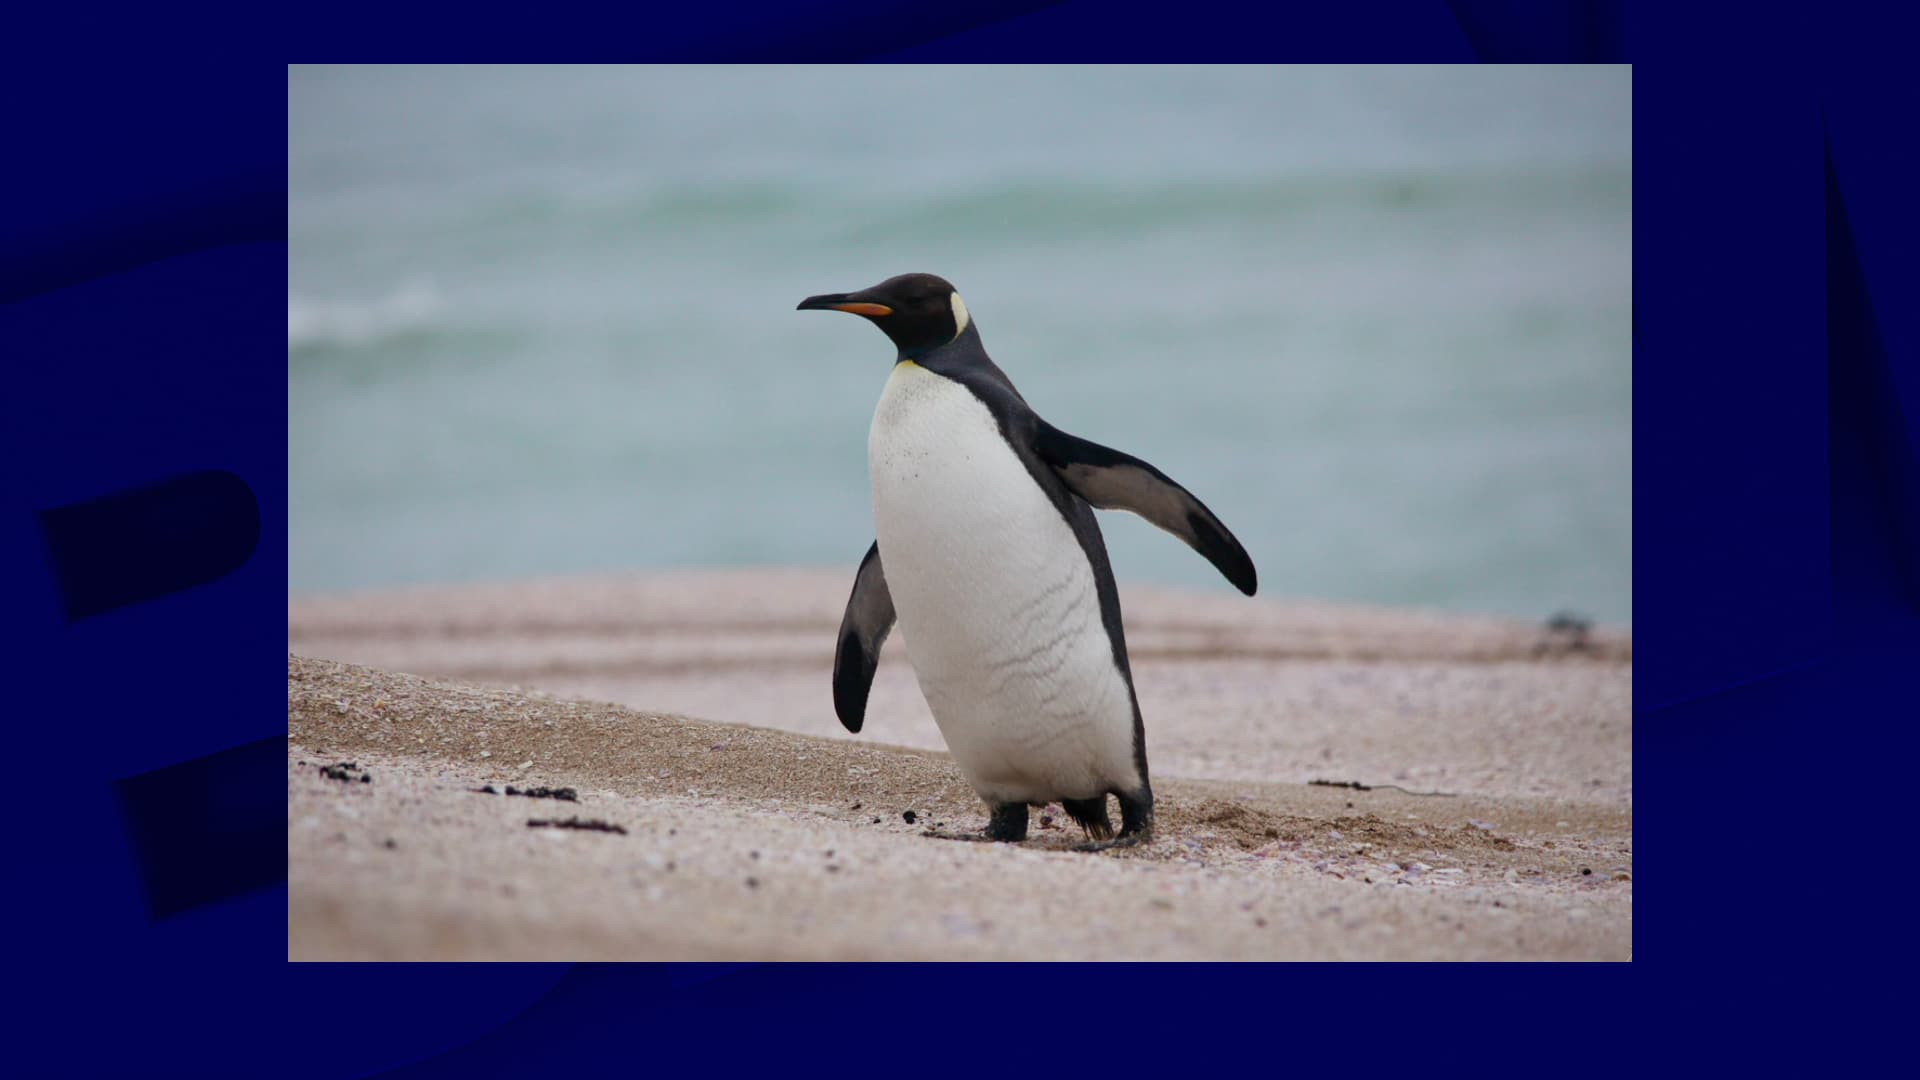 A king penguin has traveled thousands of kilometers to land on a beach in Australia